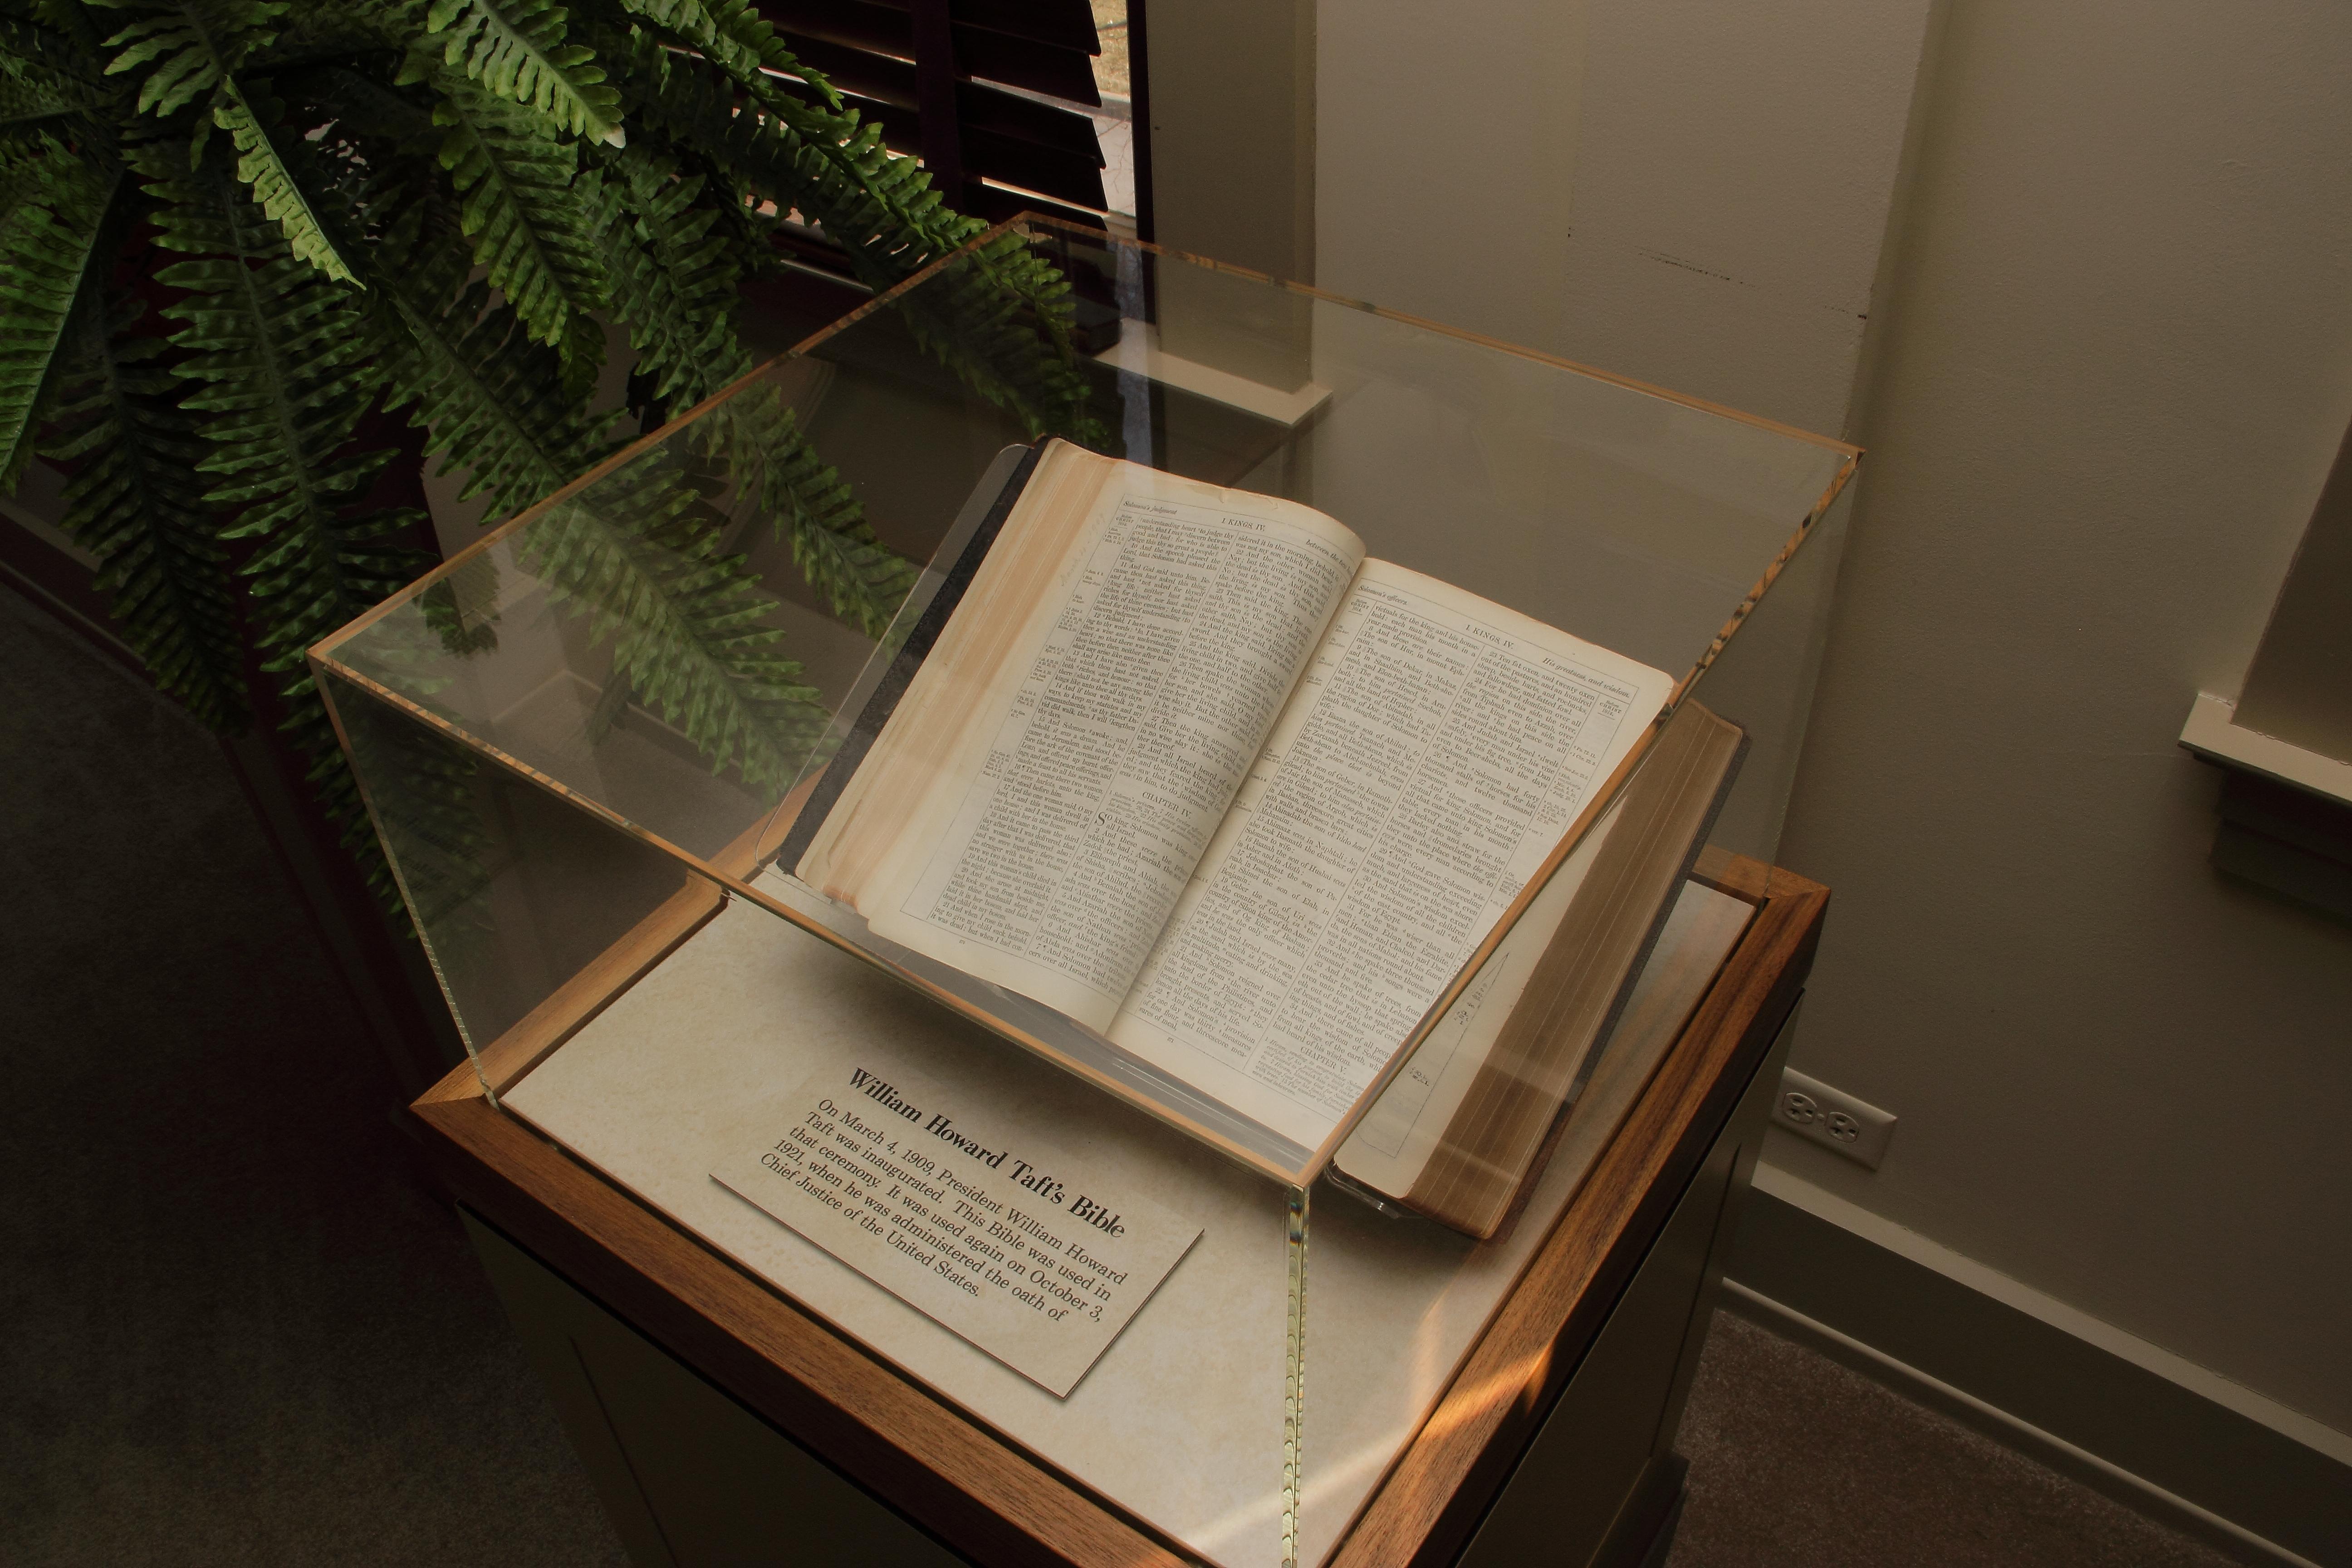 A large open book on display in a glass-enclosed case.